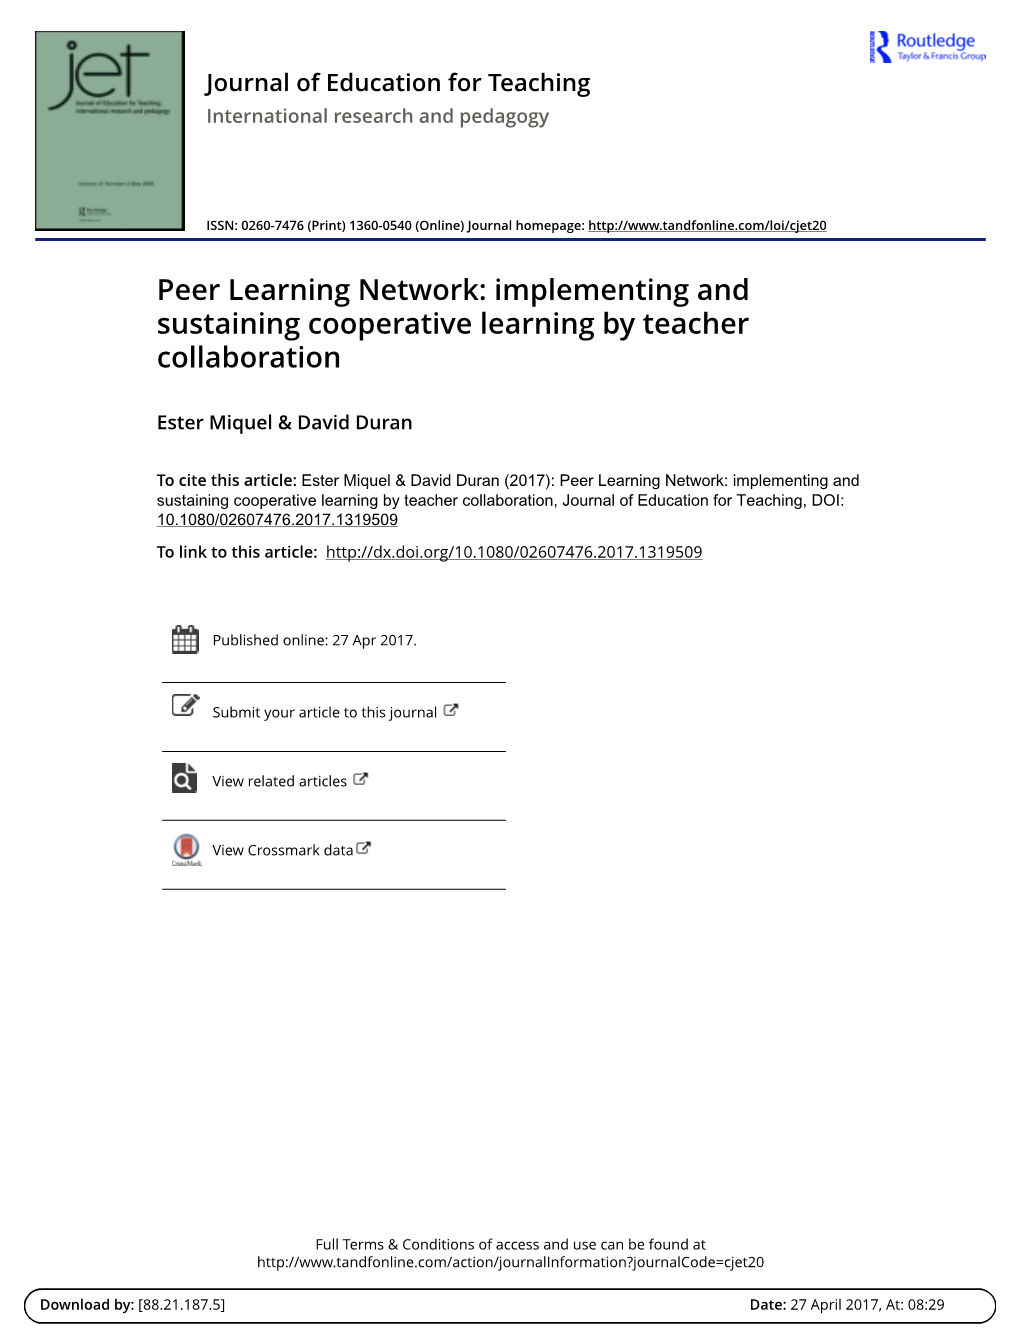 Peer Learning Network: Implementing and Sustaining Cooperative Learning by Teacher Collaboration